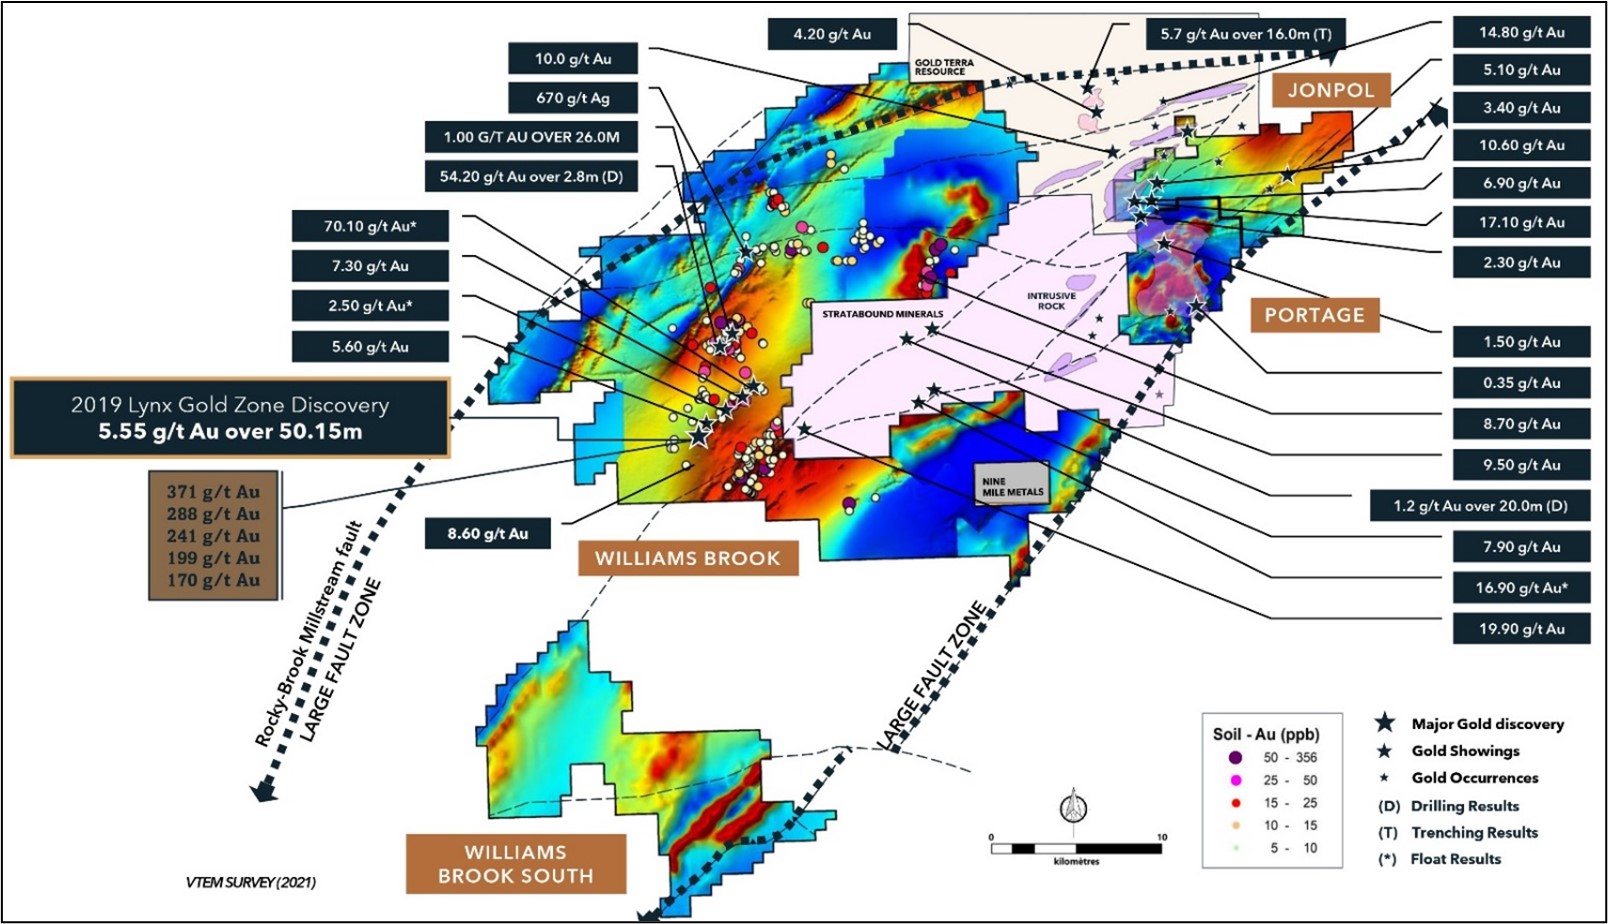 Main gold showings and occurrences at the Williams Brook Gold Project